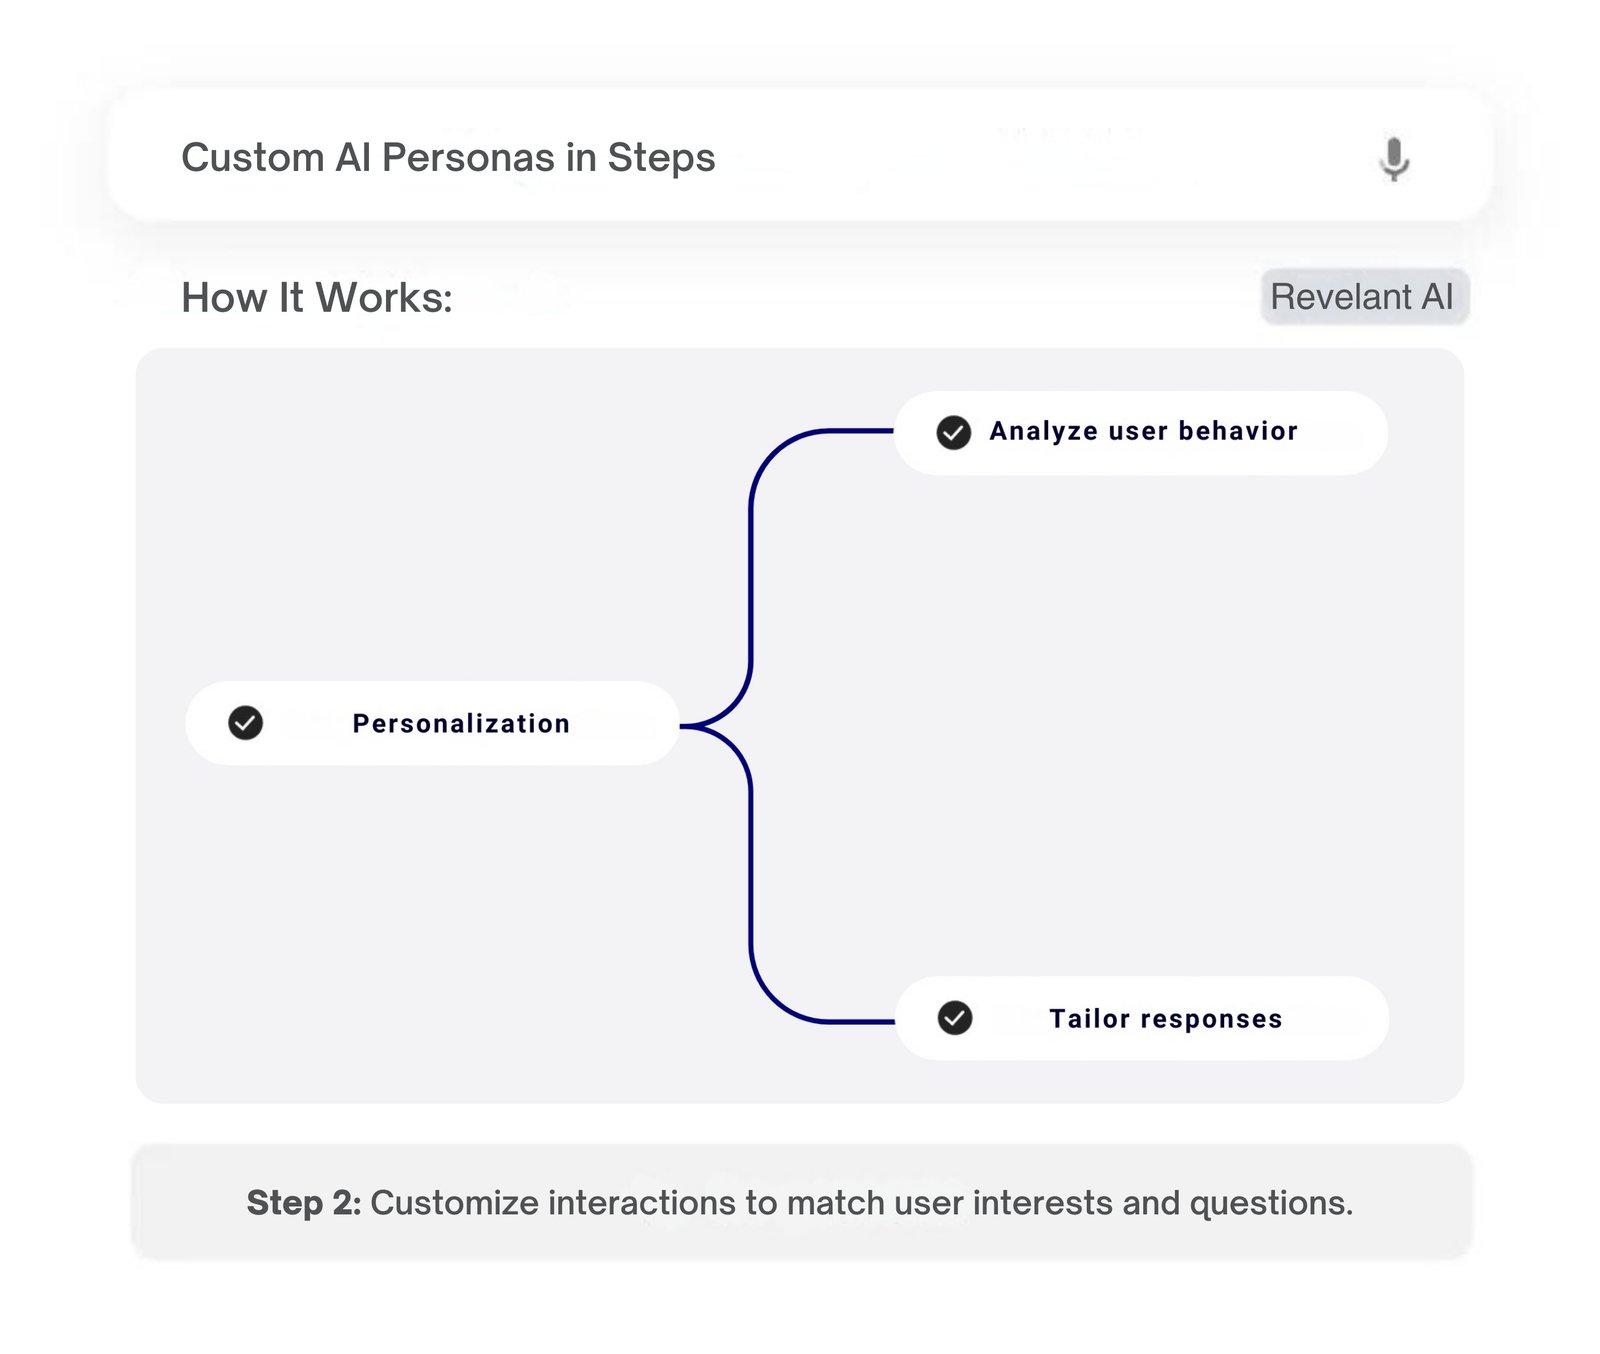 Graphic representation of step 2 in developing custom AI personas, focusing on personalization through user behavior analysis and response tailoring.